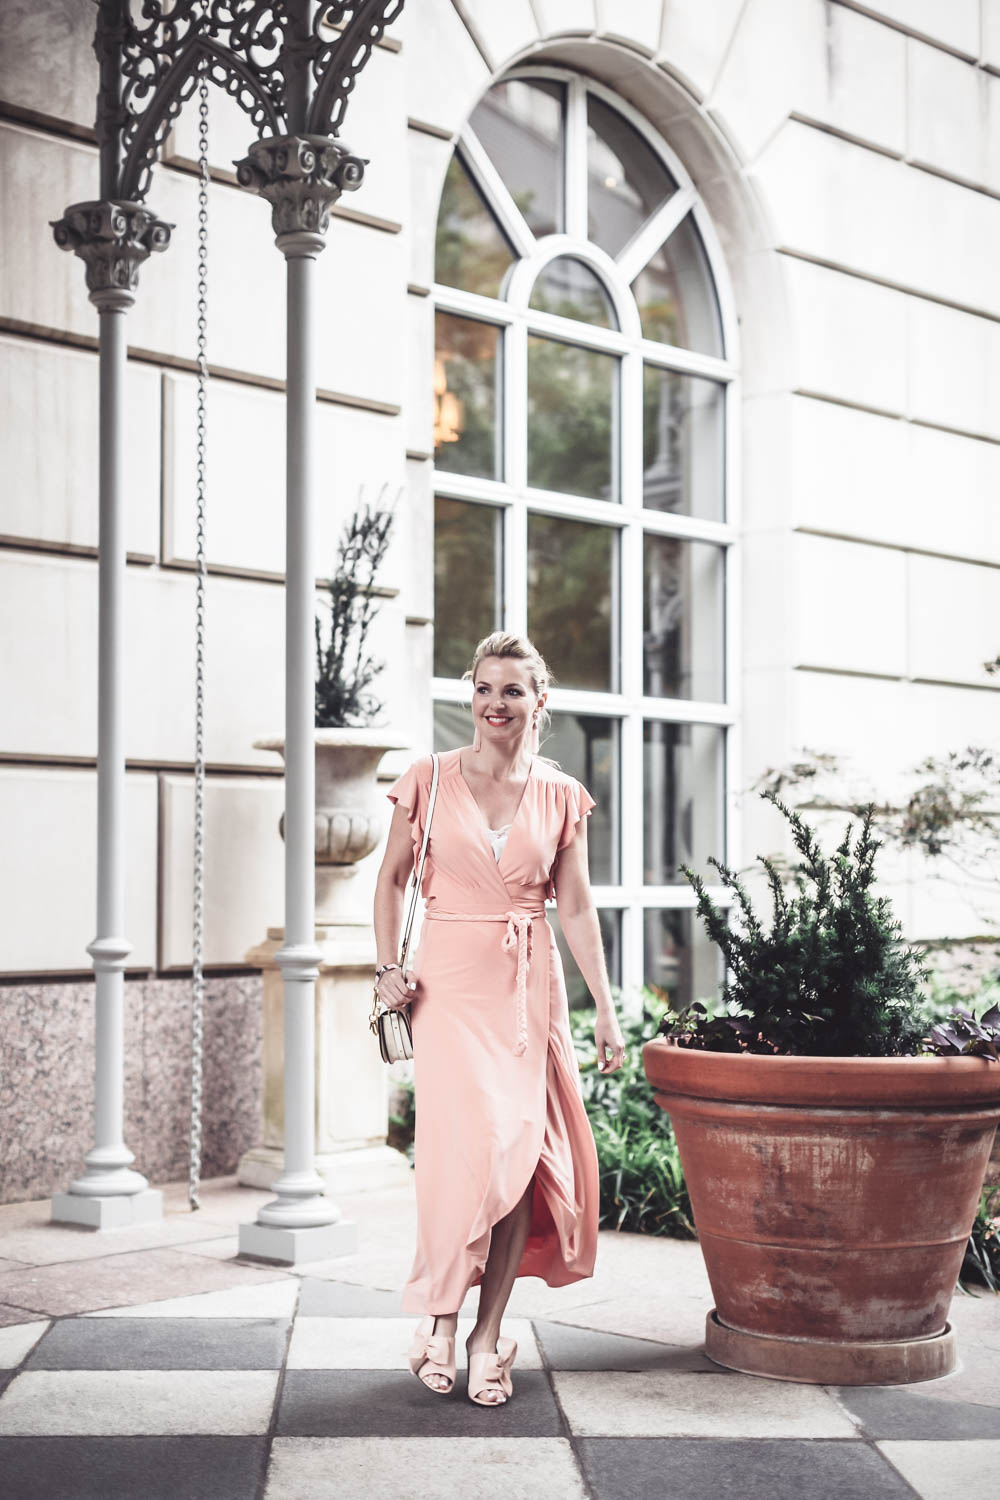 Peach dress by Misa from Revolve Clothing on fashion blogger and youtuber, Erin Busbee, San antonio, Texas, at the Crescent hotel in Dallas for the Reward style conference 